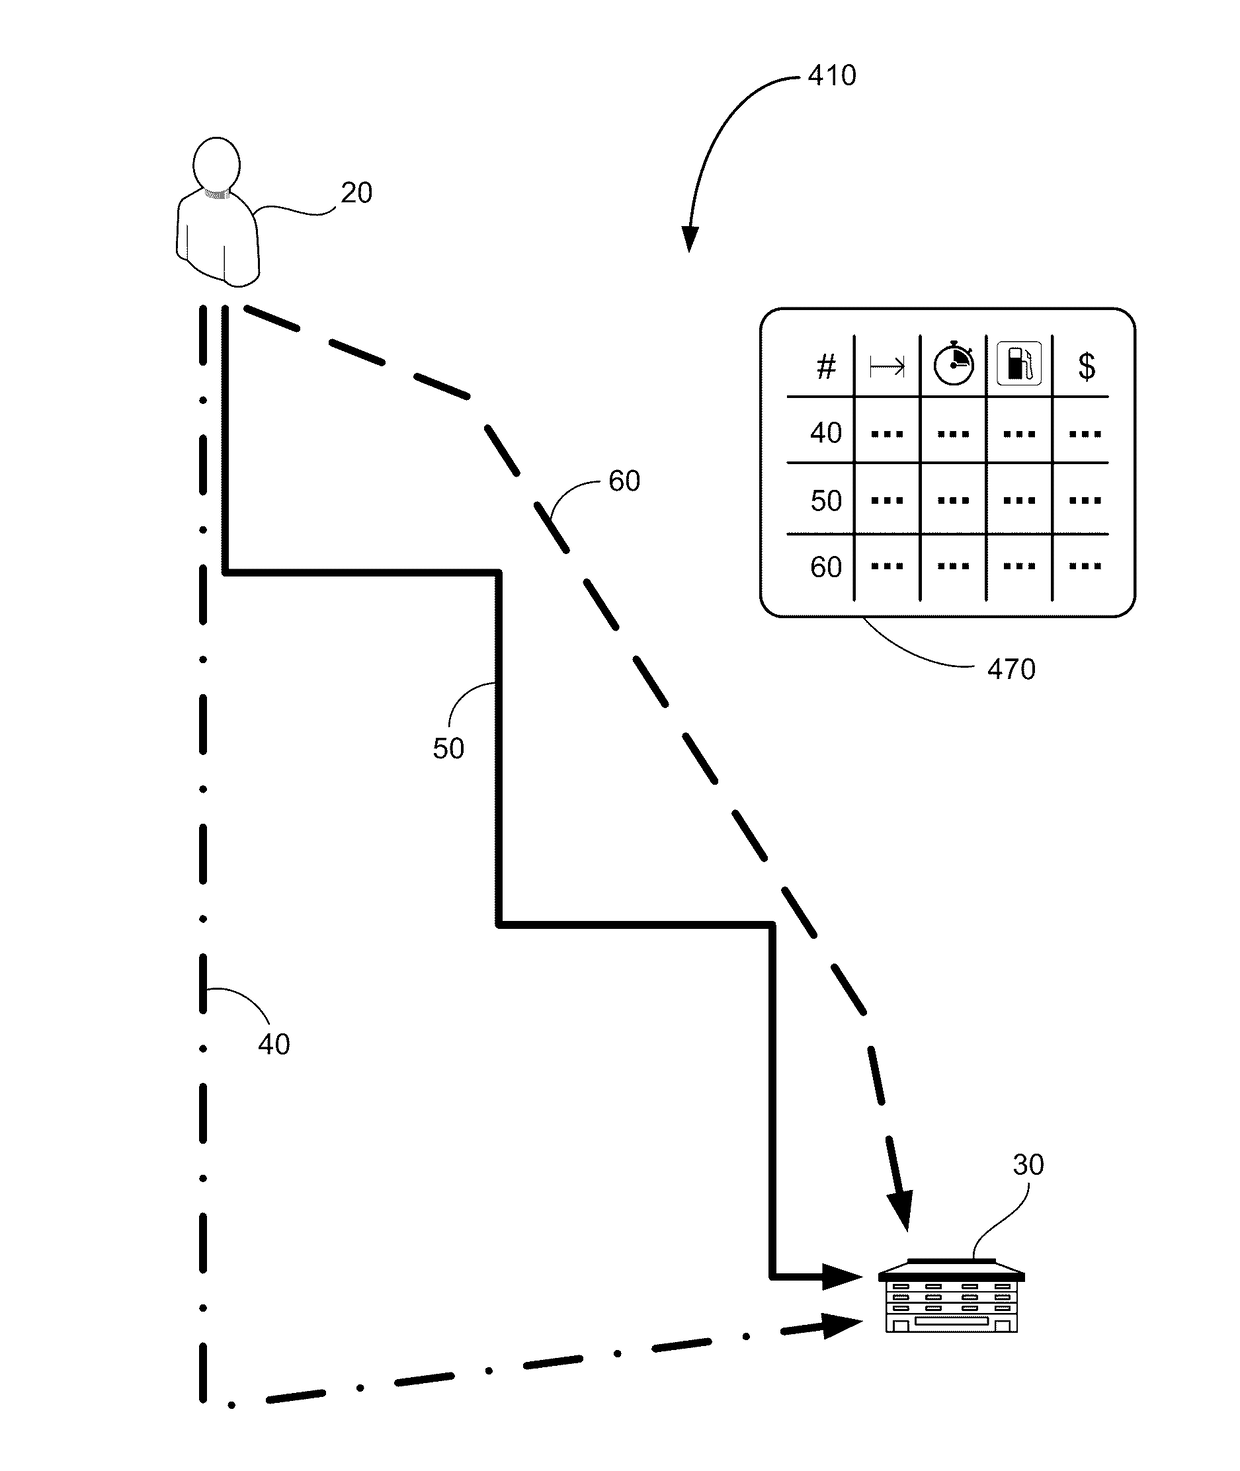 Method and apparatus for fuel consumption prediction and cost estimation via crowd-sensing in vehicle navigation system